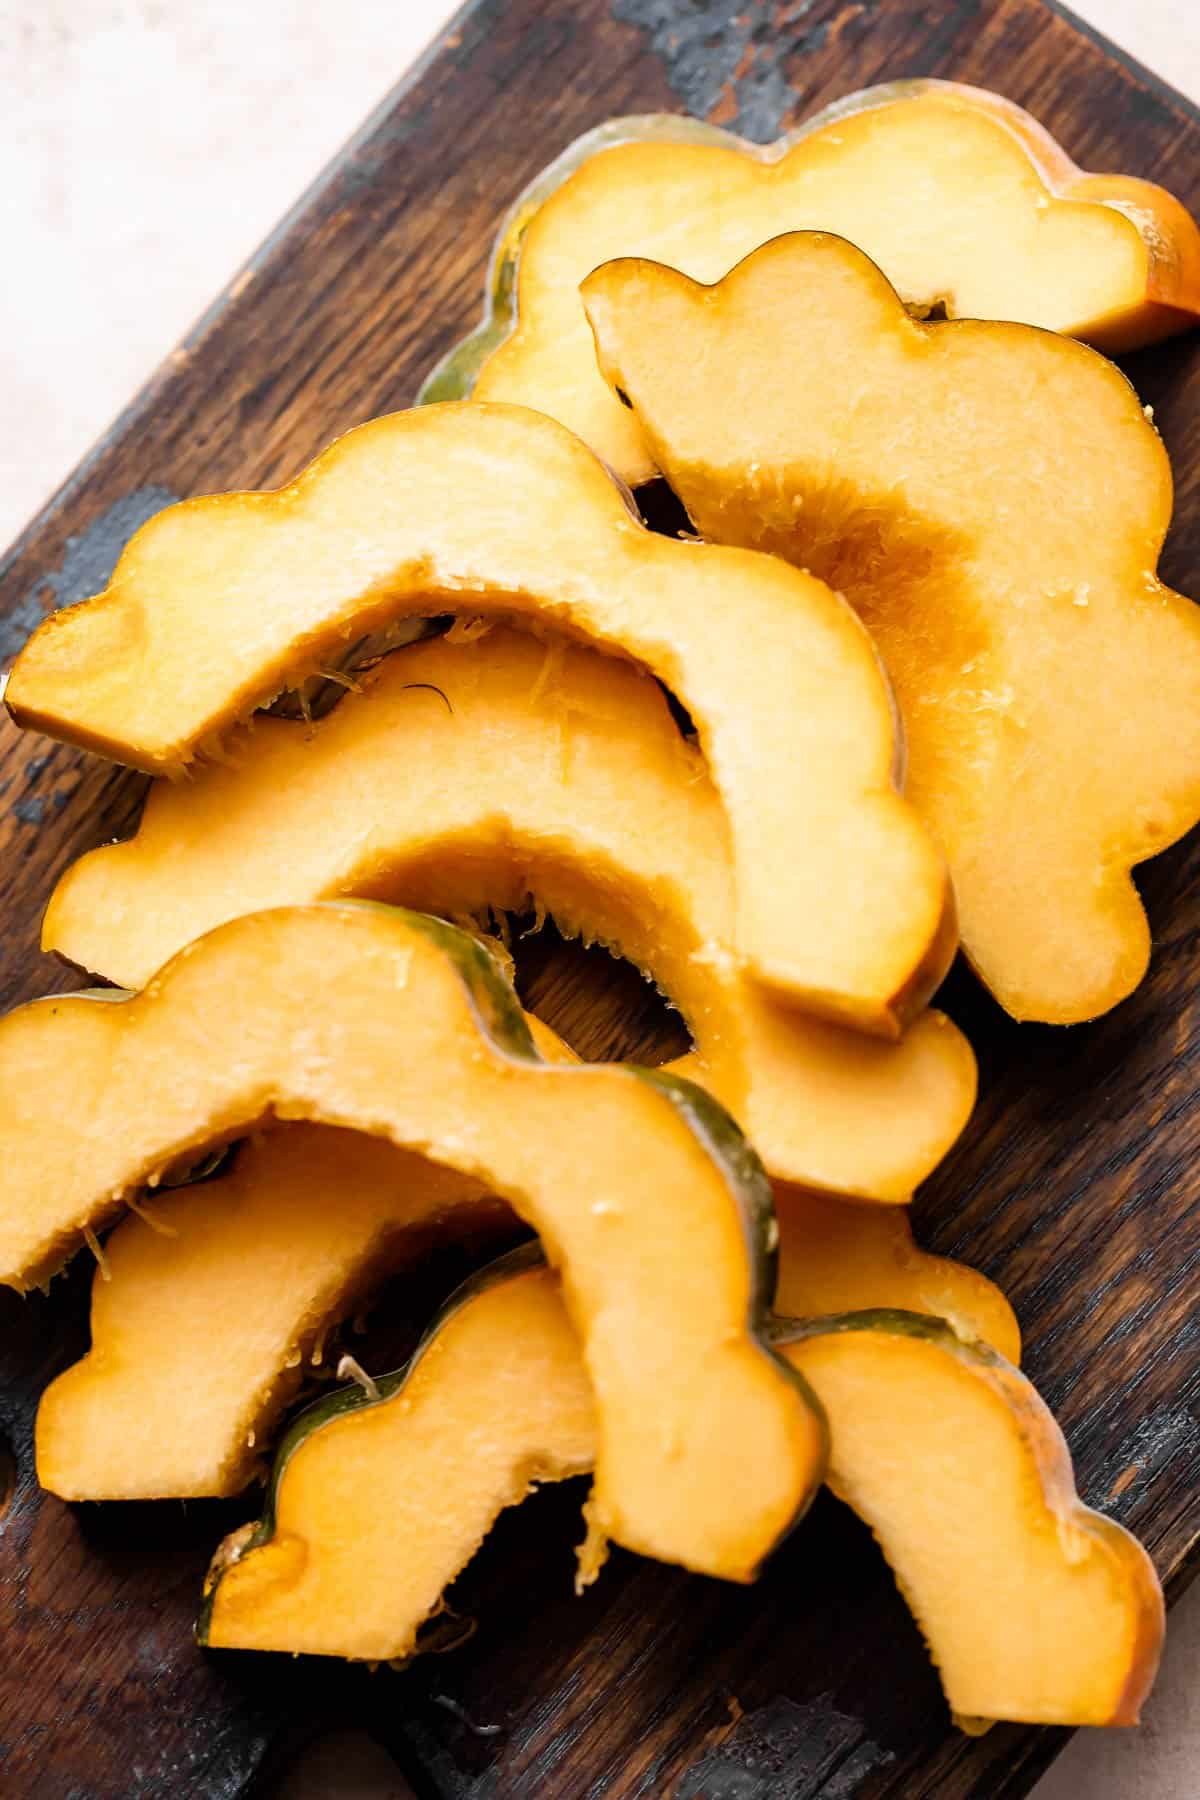 raw acorn squash cut into half-moon slices and set on a wooden board.